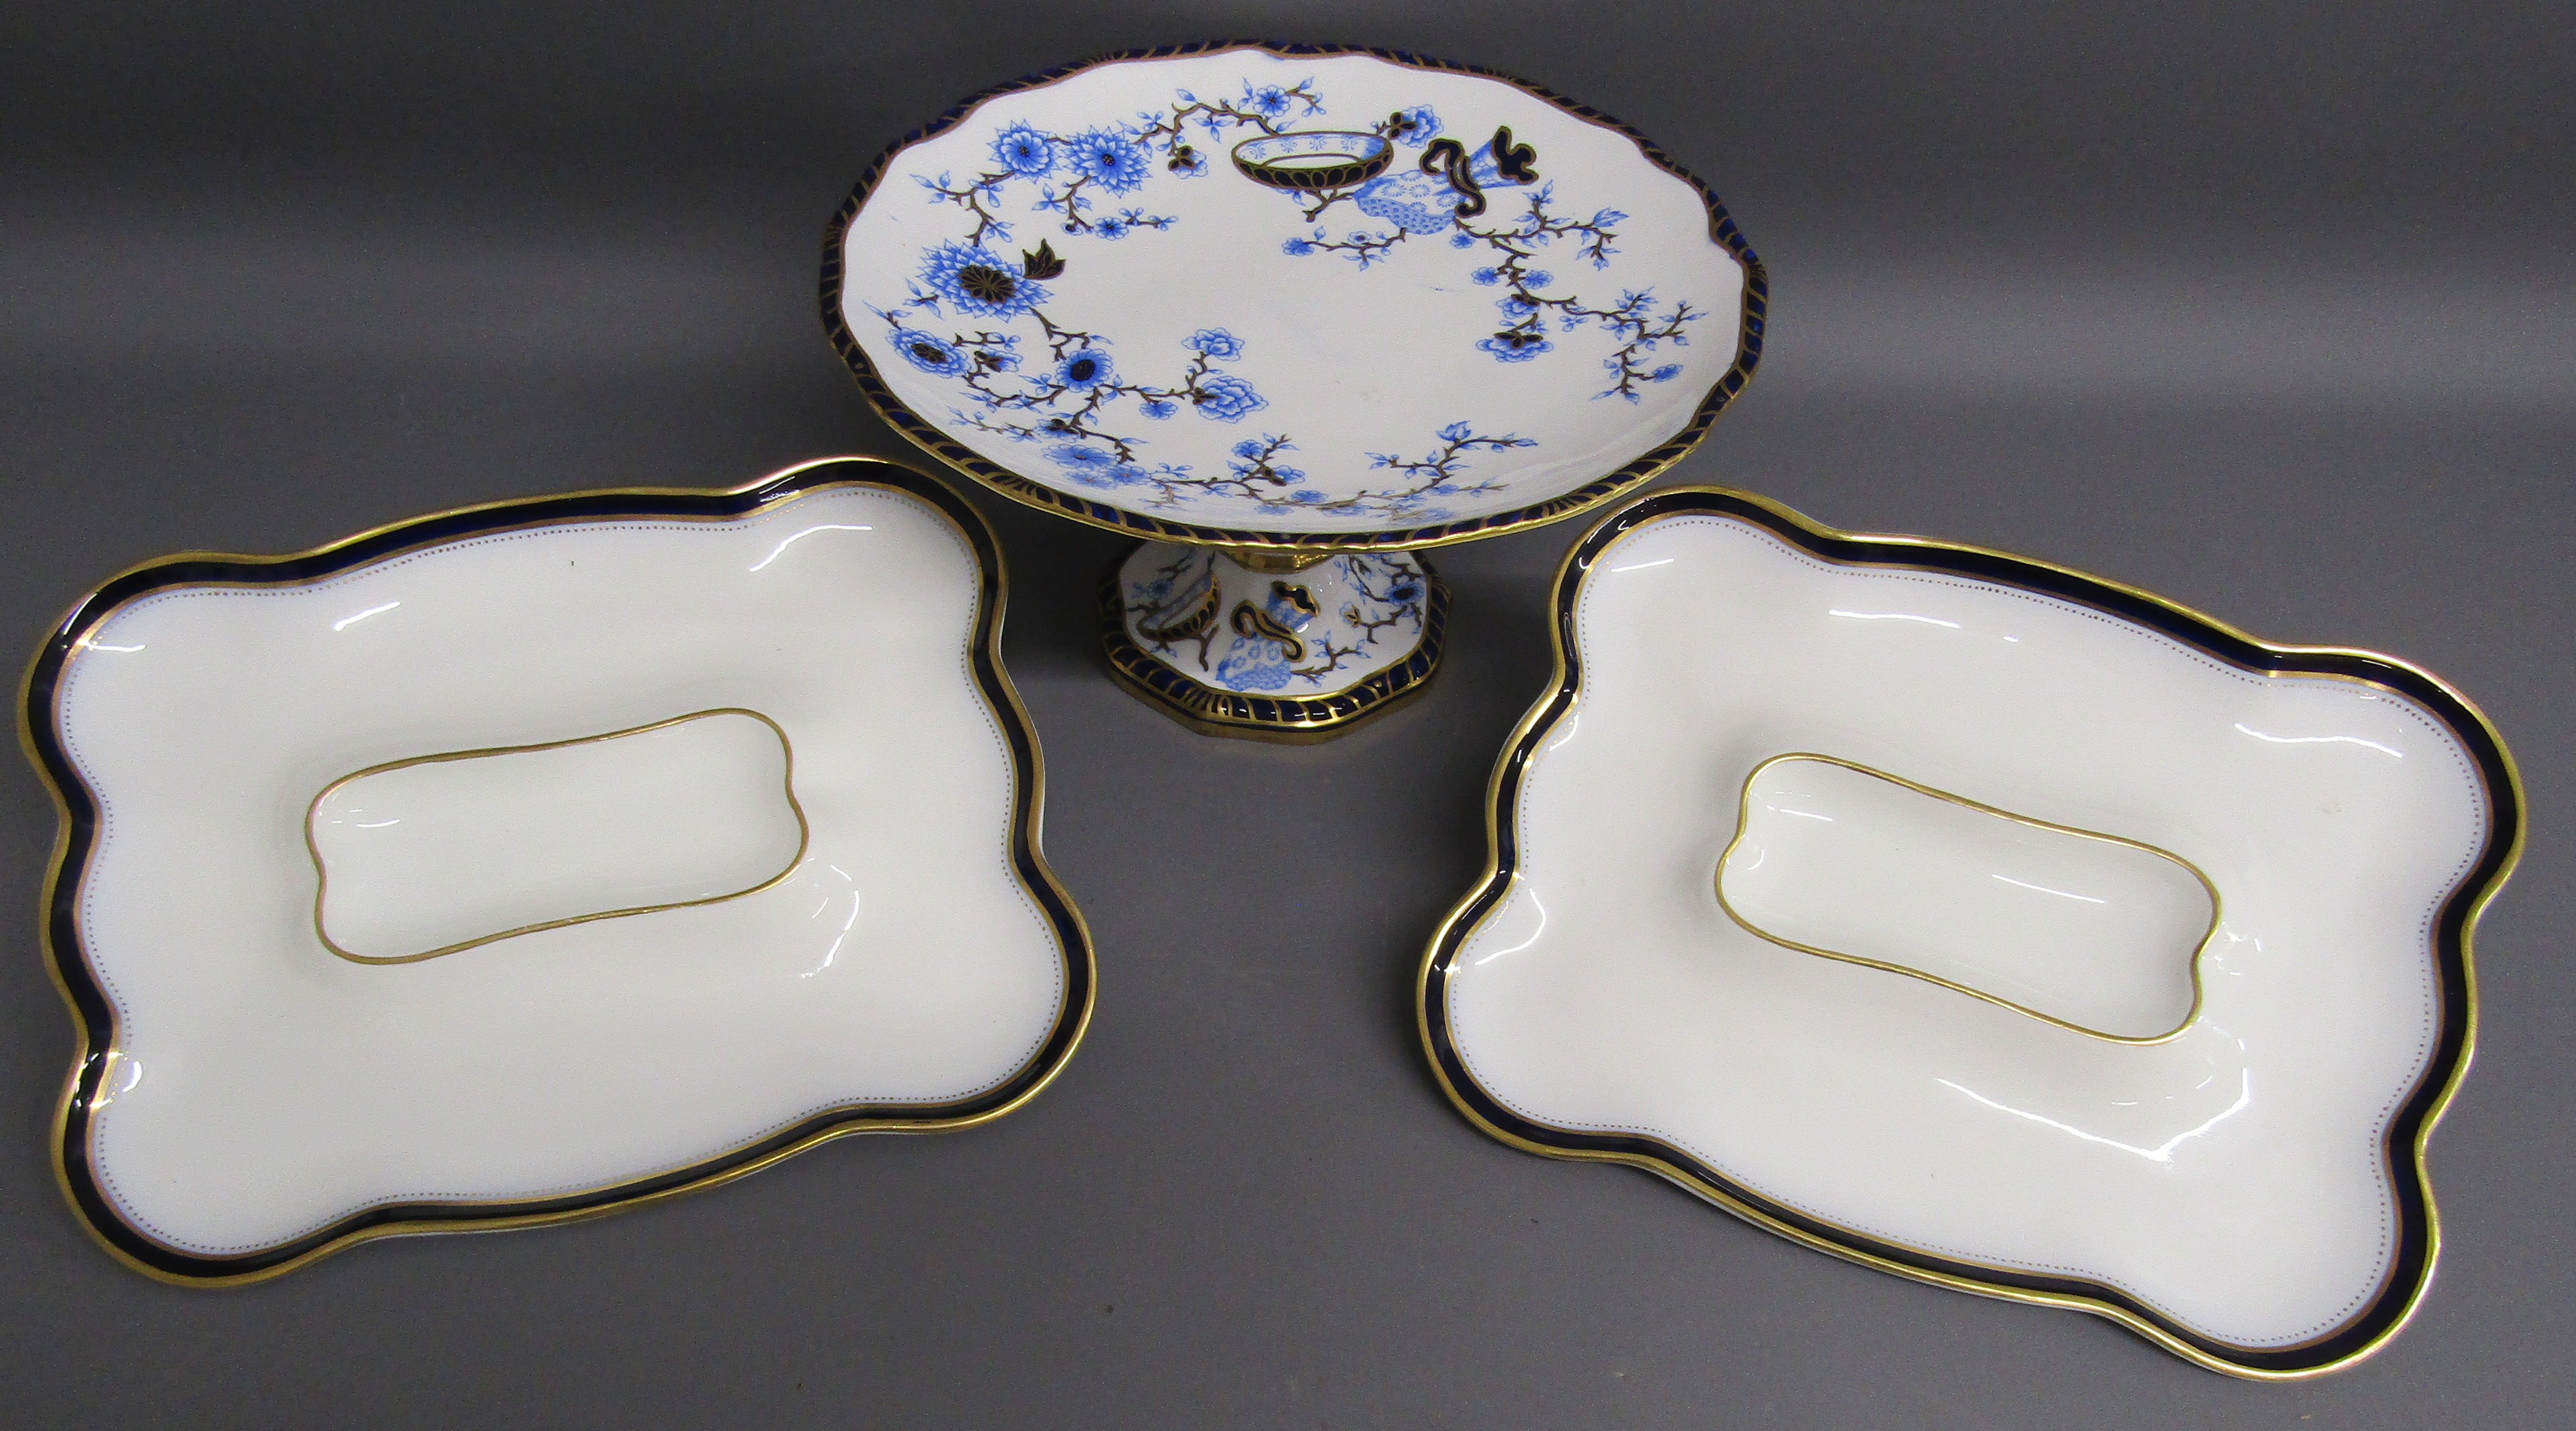 Royal Crown Derby tazza Rd No 56464 pattern No 2715? and 2 George Jones Crescent plates